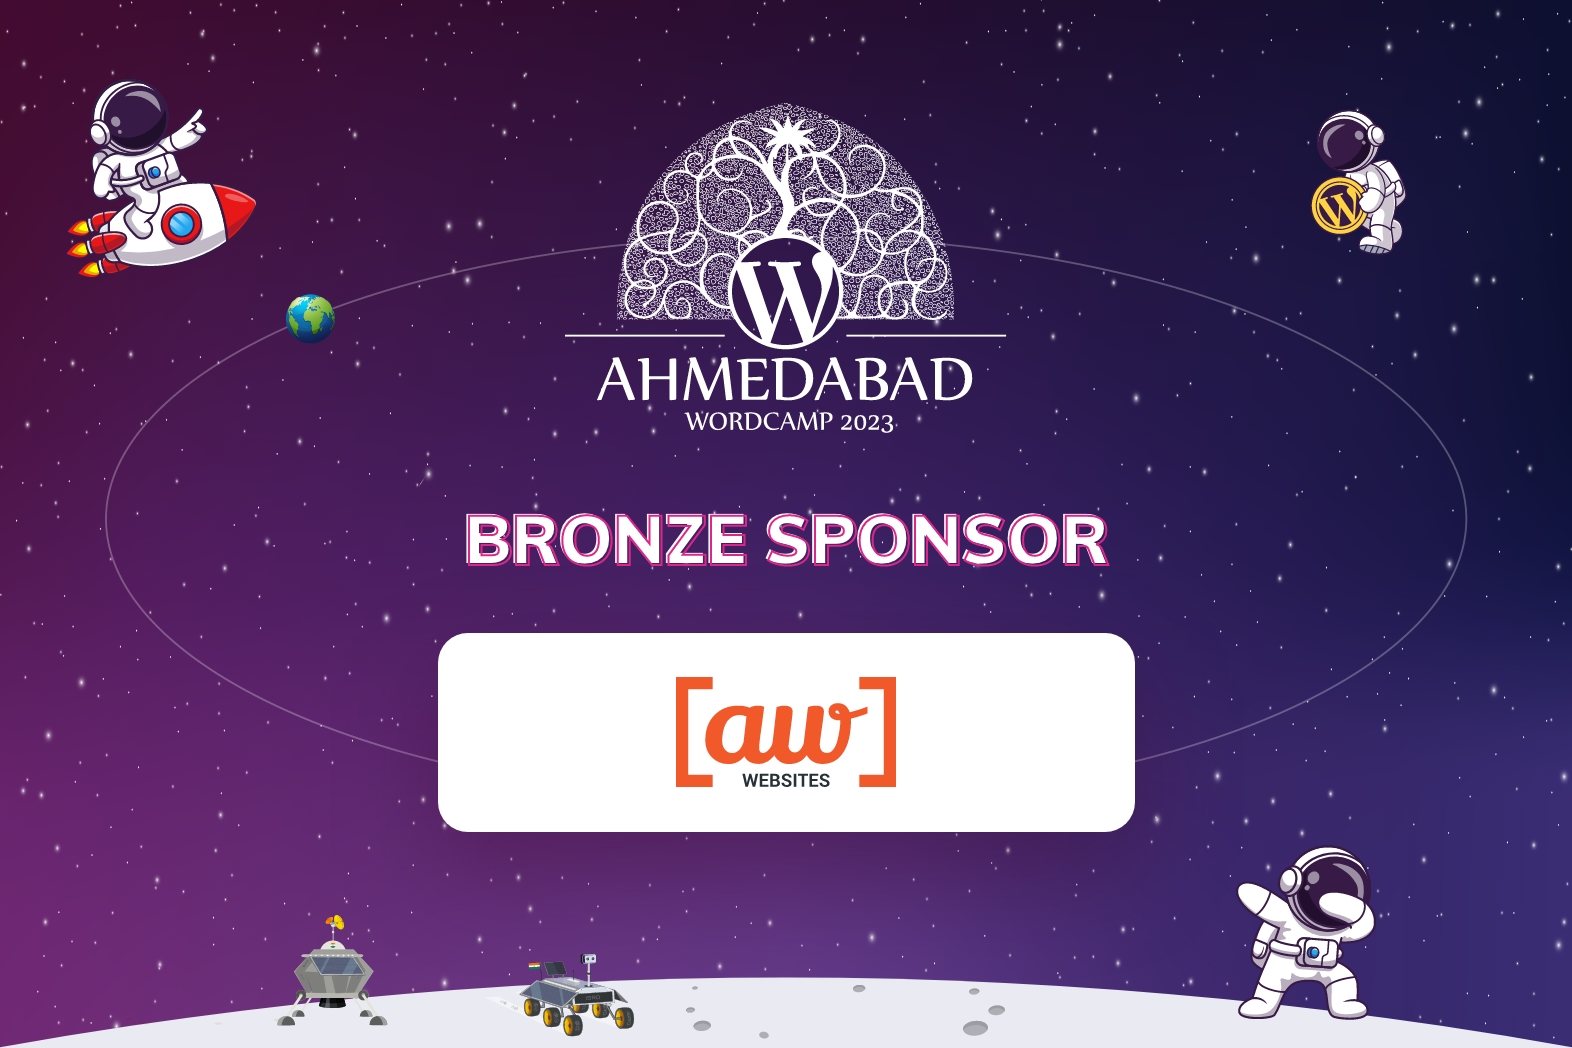 Thank You Awesome Websites, for being our Bronze Sponsor